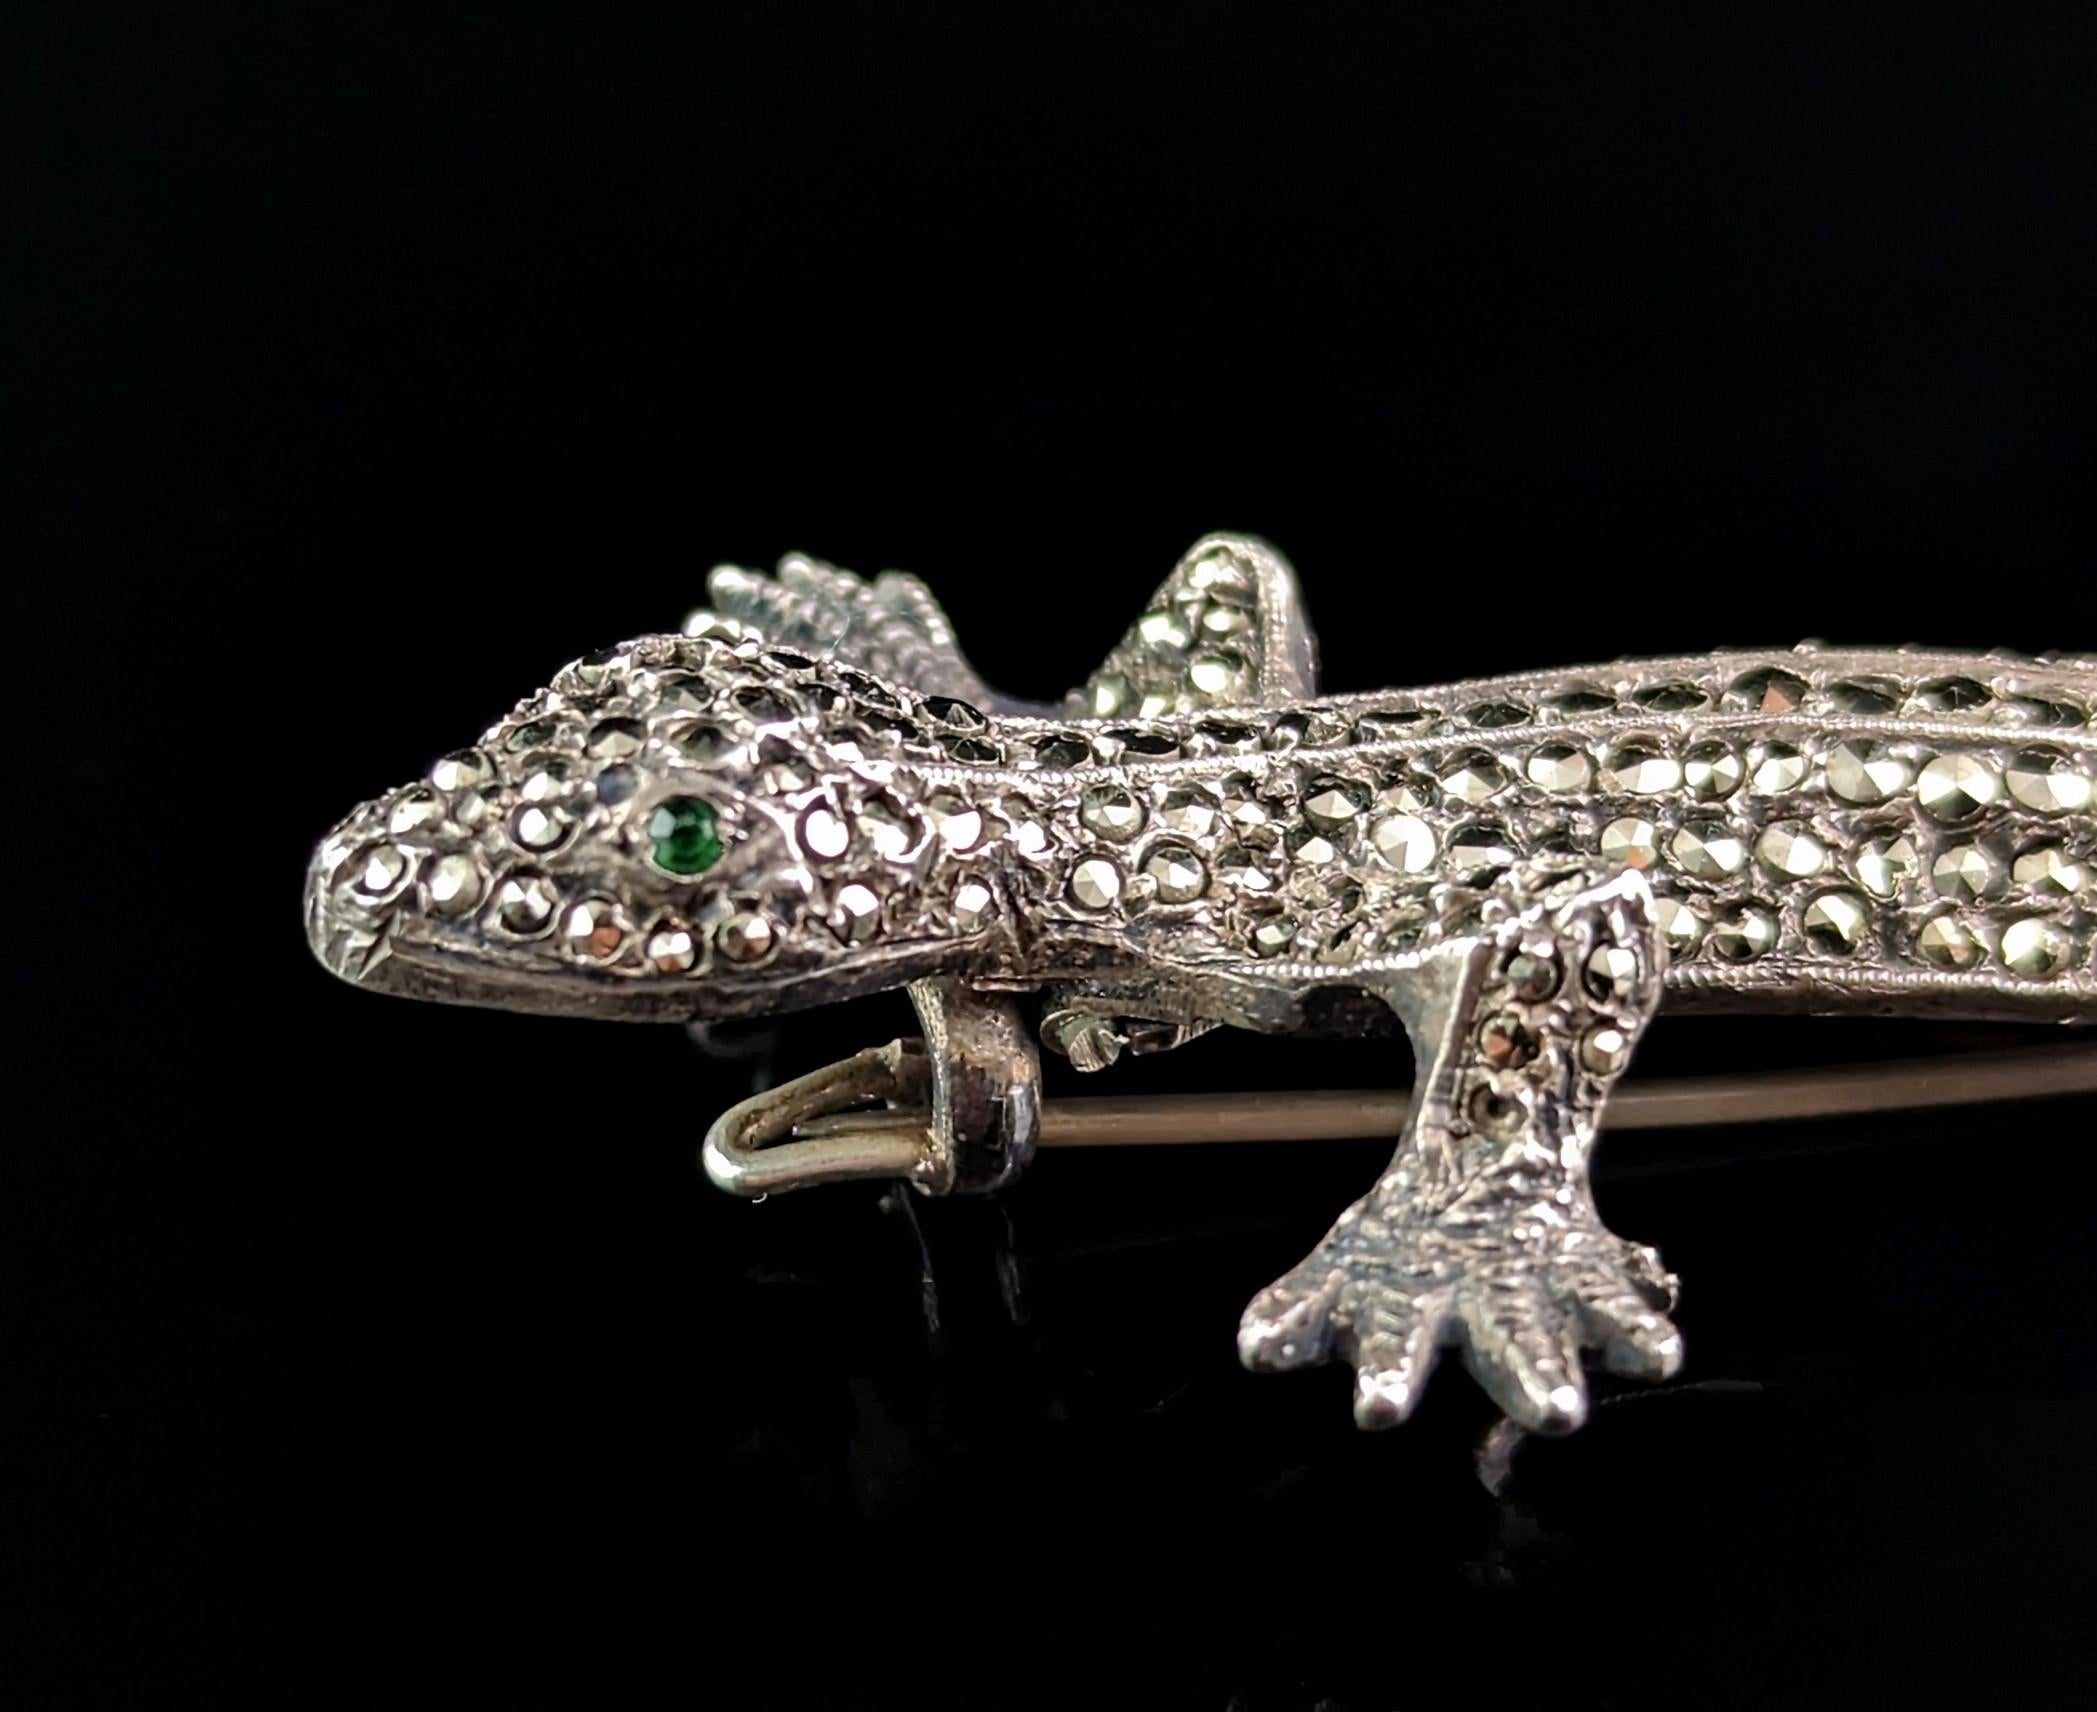 black and silver lizard